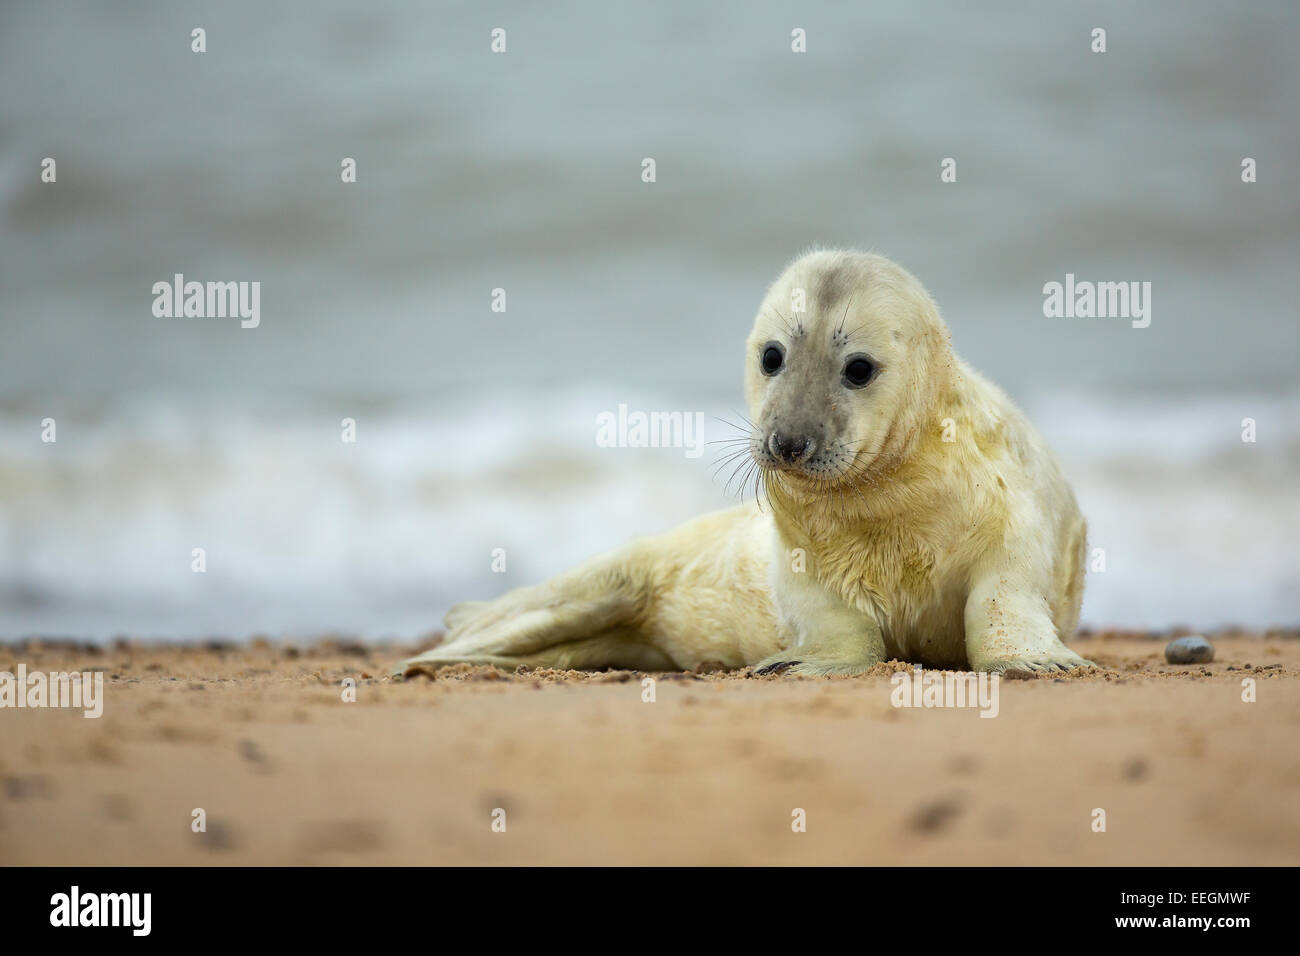 Grey Seal (Halichoerus grypus) pup laying on a sandy beach looking cute Stock Photo